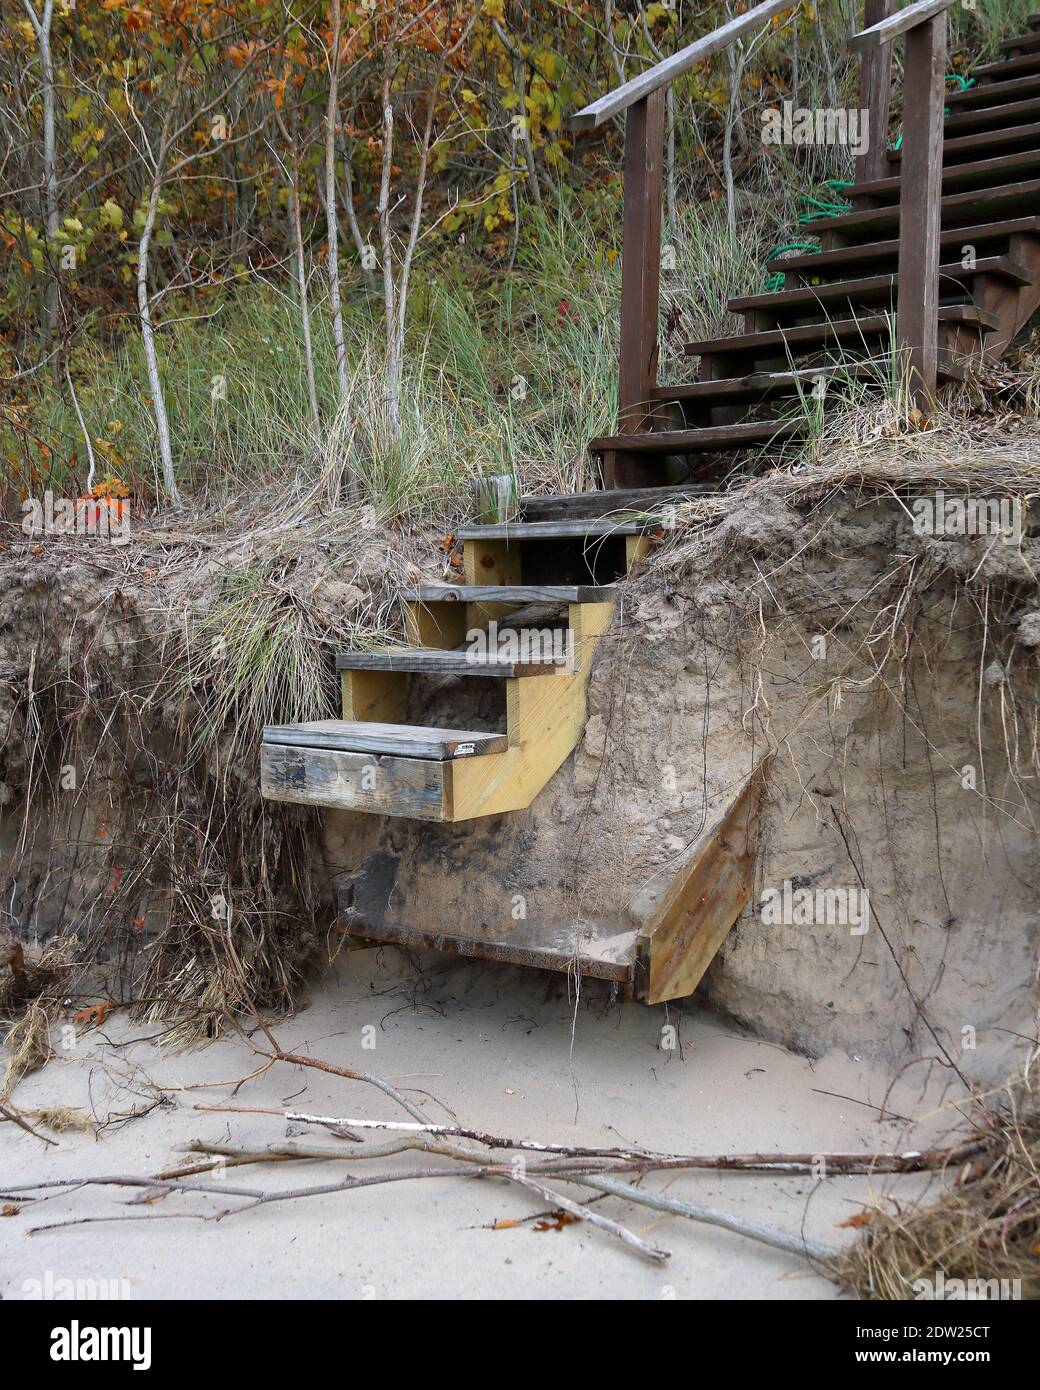 Erosion damaged wooden staircase built on the sandy edge of Lake Michigan Stock Photo